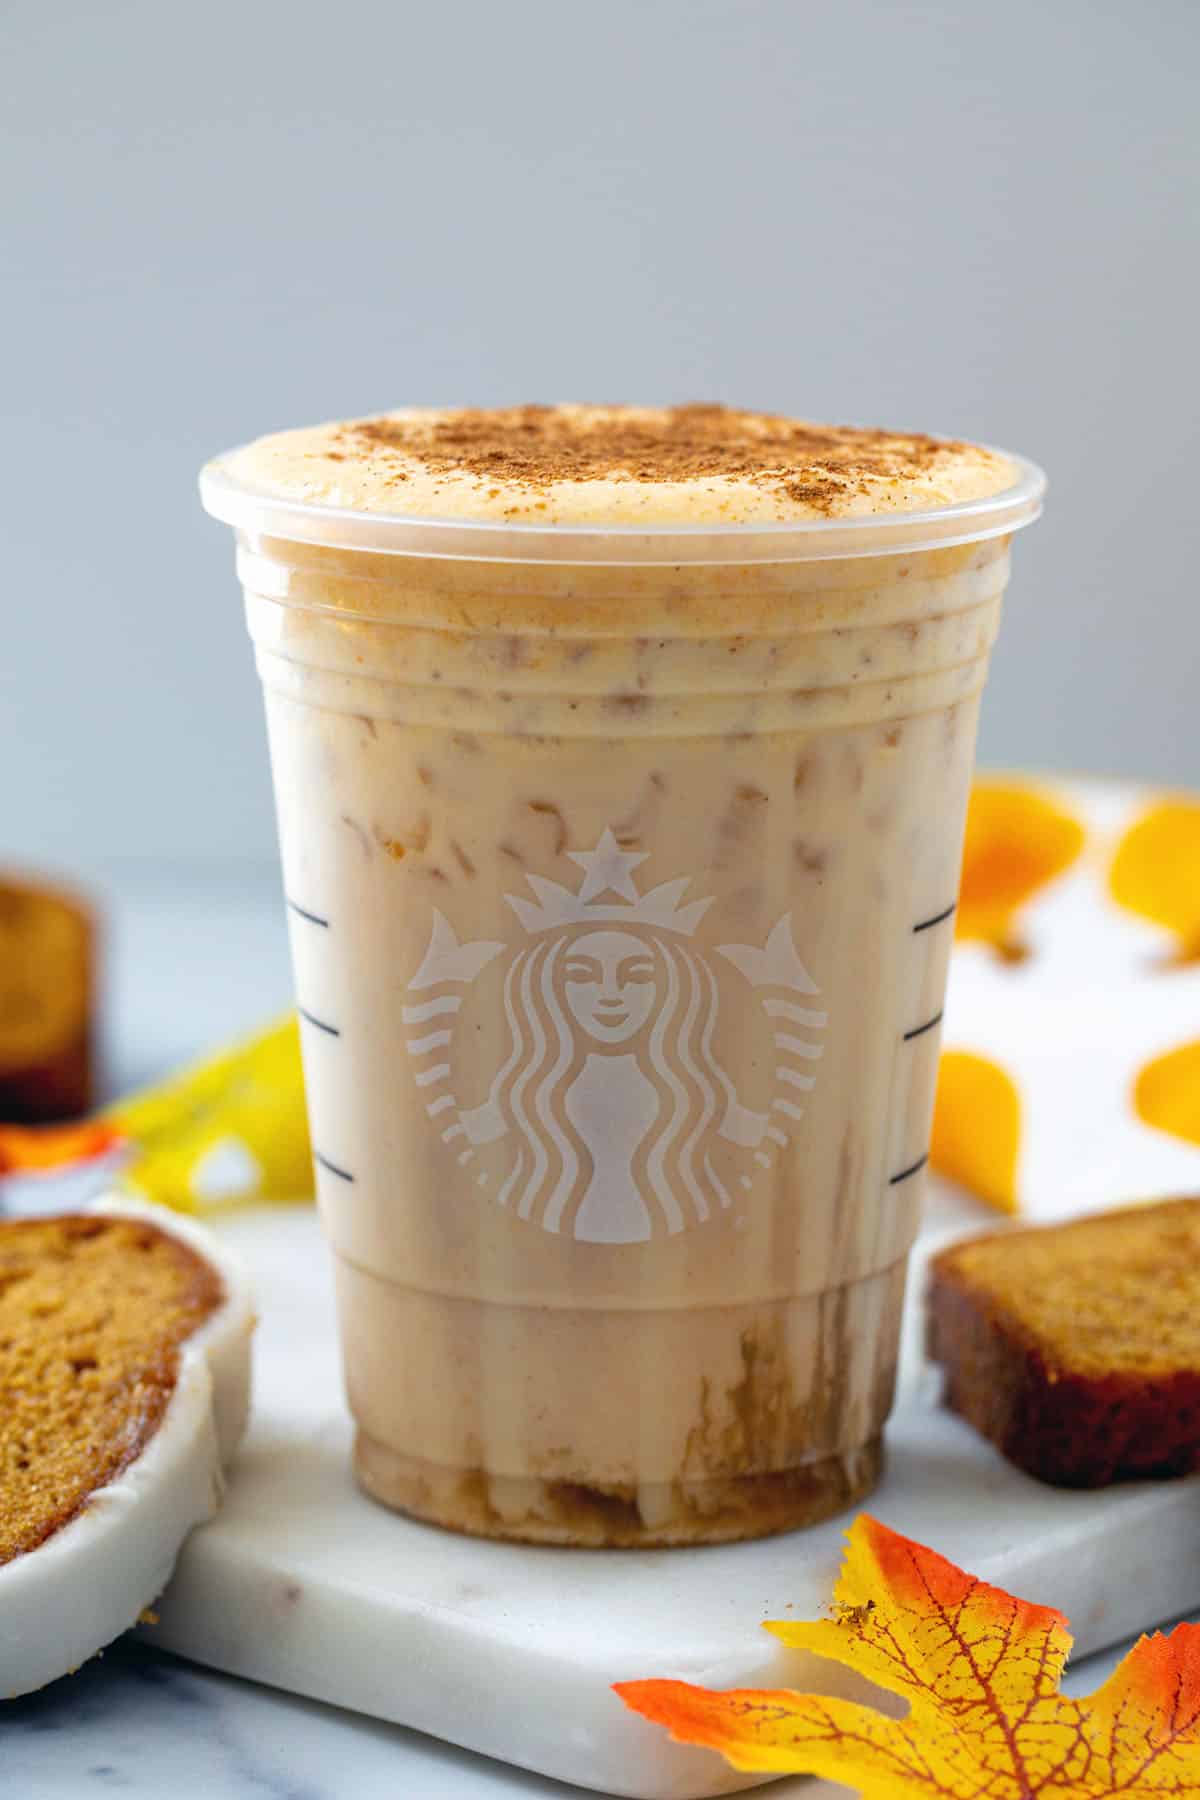 Head-on view of a Starbucks cup filled with an Iced Pumpkin Cream Chai Tea Latte with pumpkin bread around.